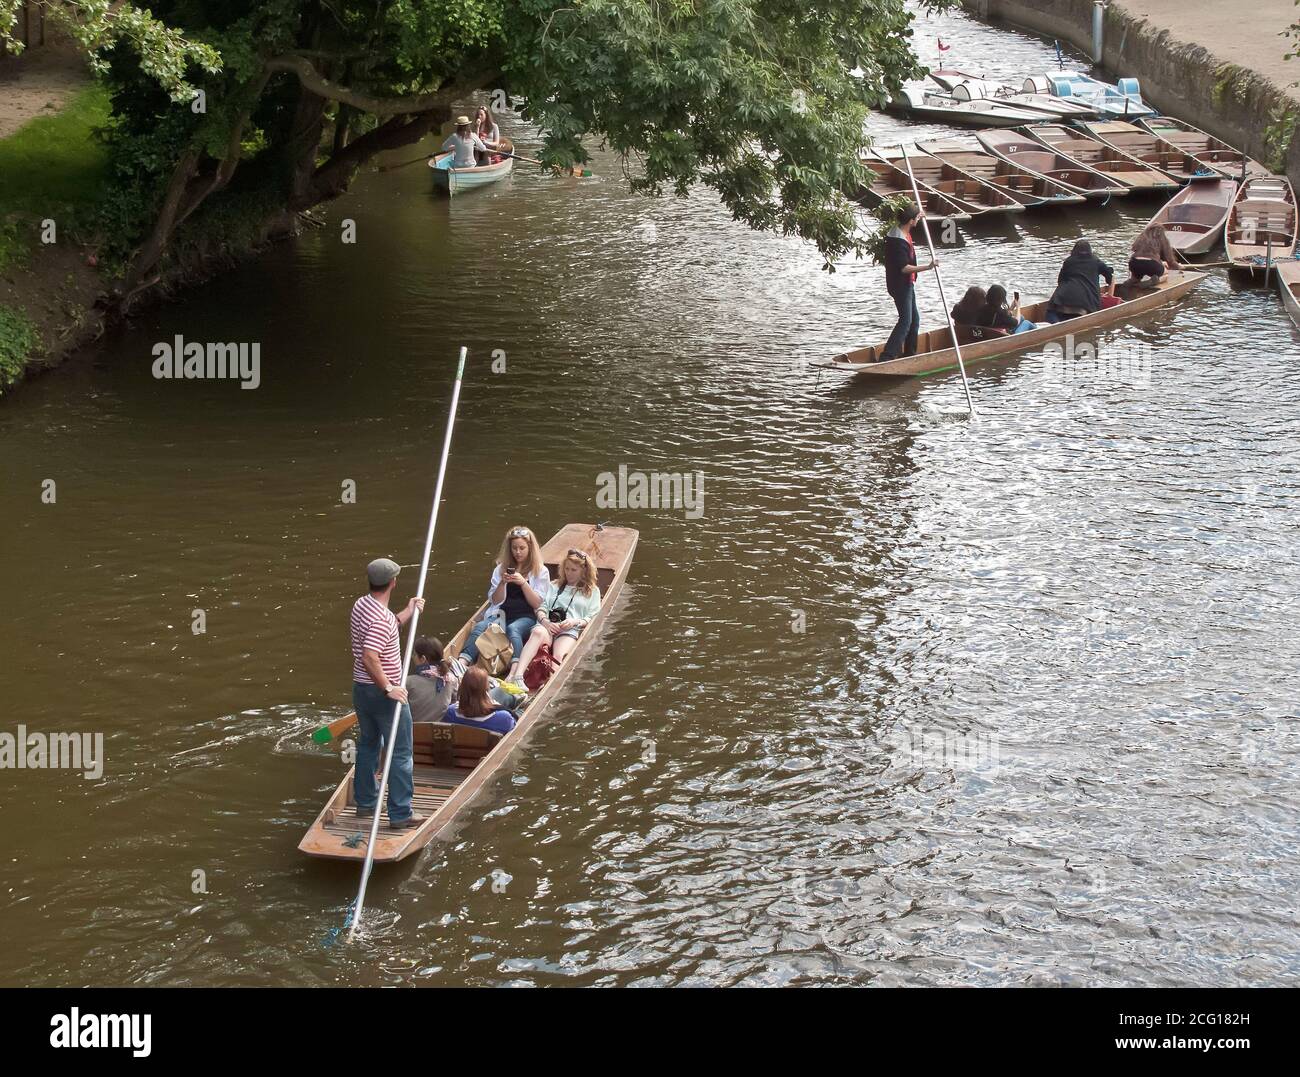 Punting on the River at Oxford, England, United Kingdom Stock Photo